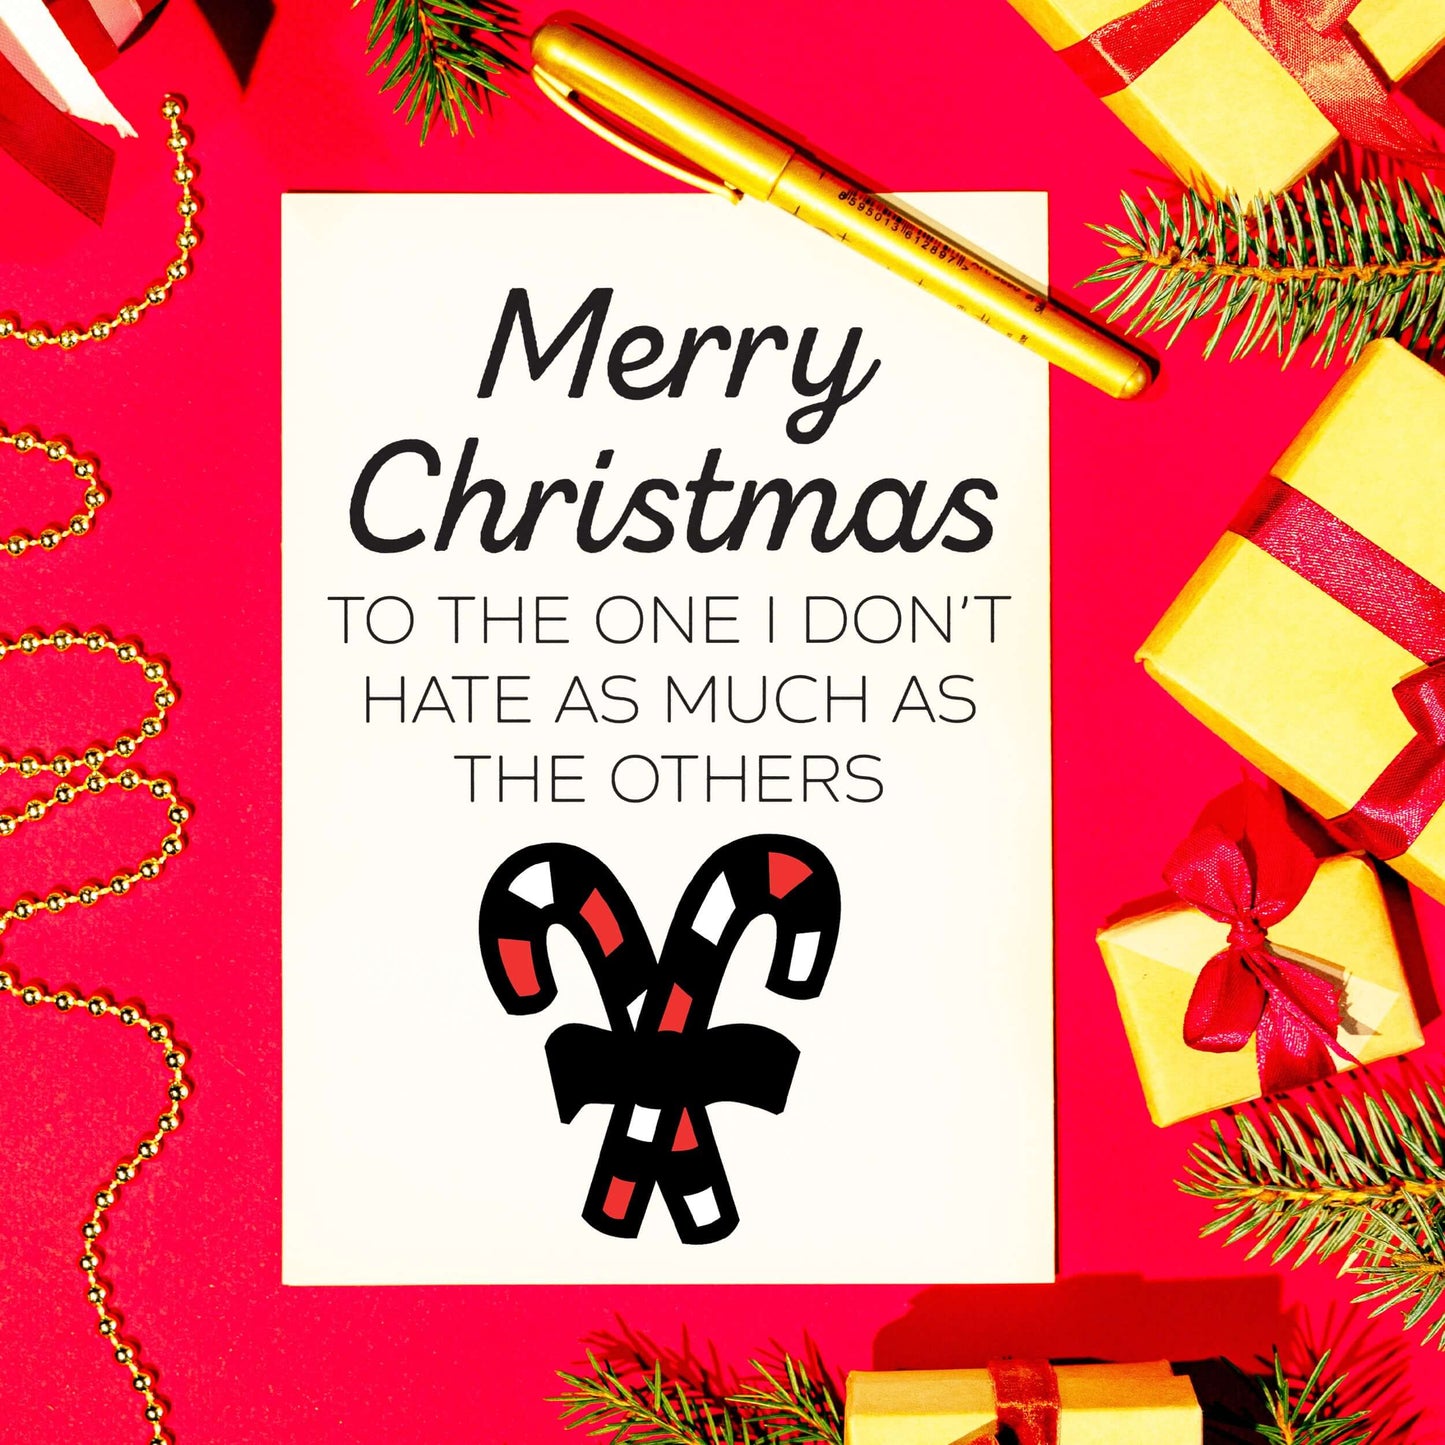 Little Kraken's Merry Christmas to The One I Don't Hate As Much As The Others Funny Candycane Christmas White A5 Greeting Card, Christmas Cards for £3.50 each